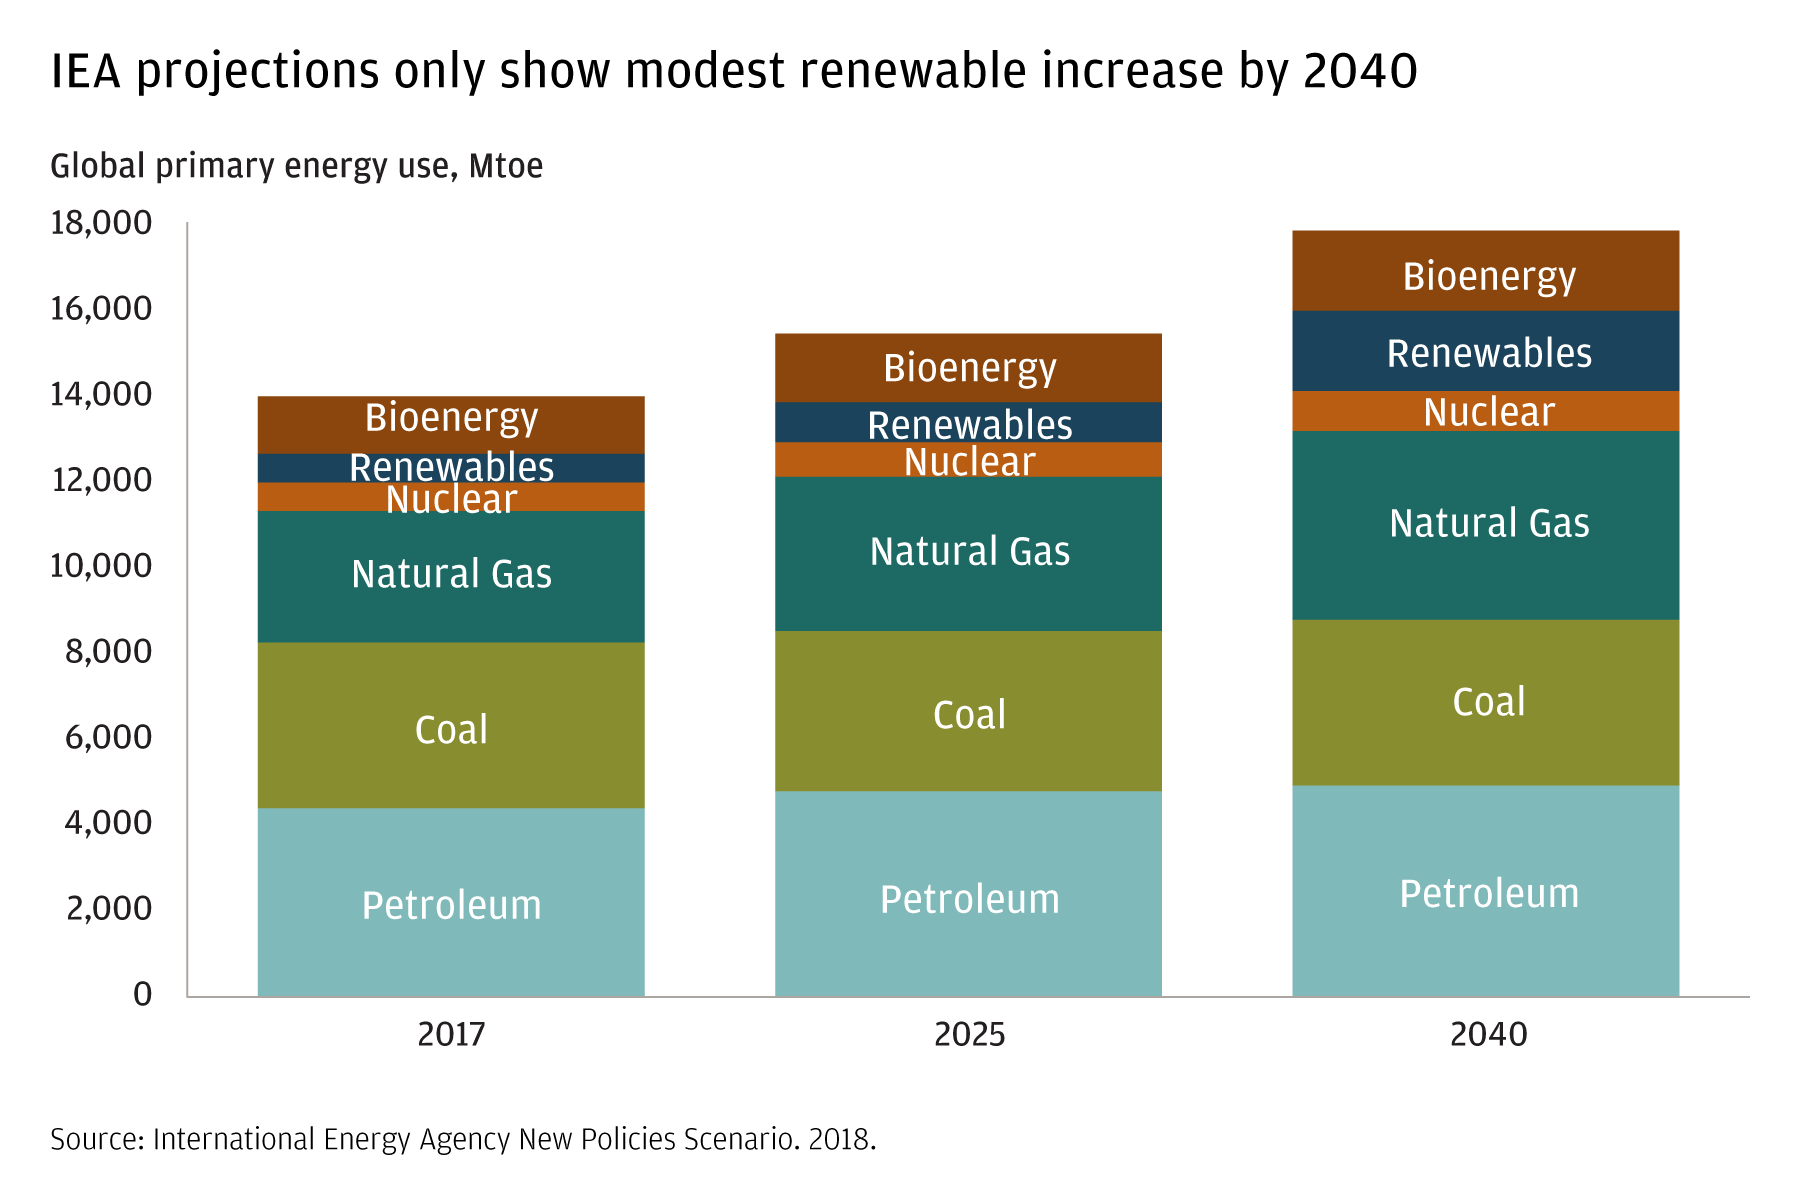 This table shows the extremely modest growth in renewable energy sources between now and 2040. The energy source expected to grow the most is natural gas. 